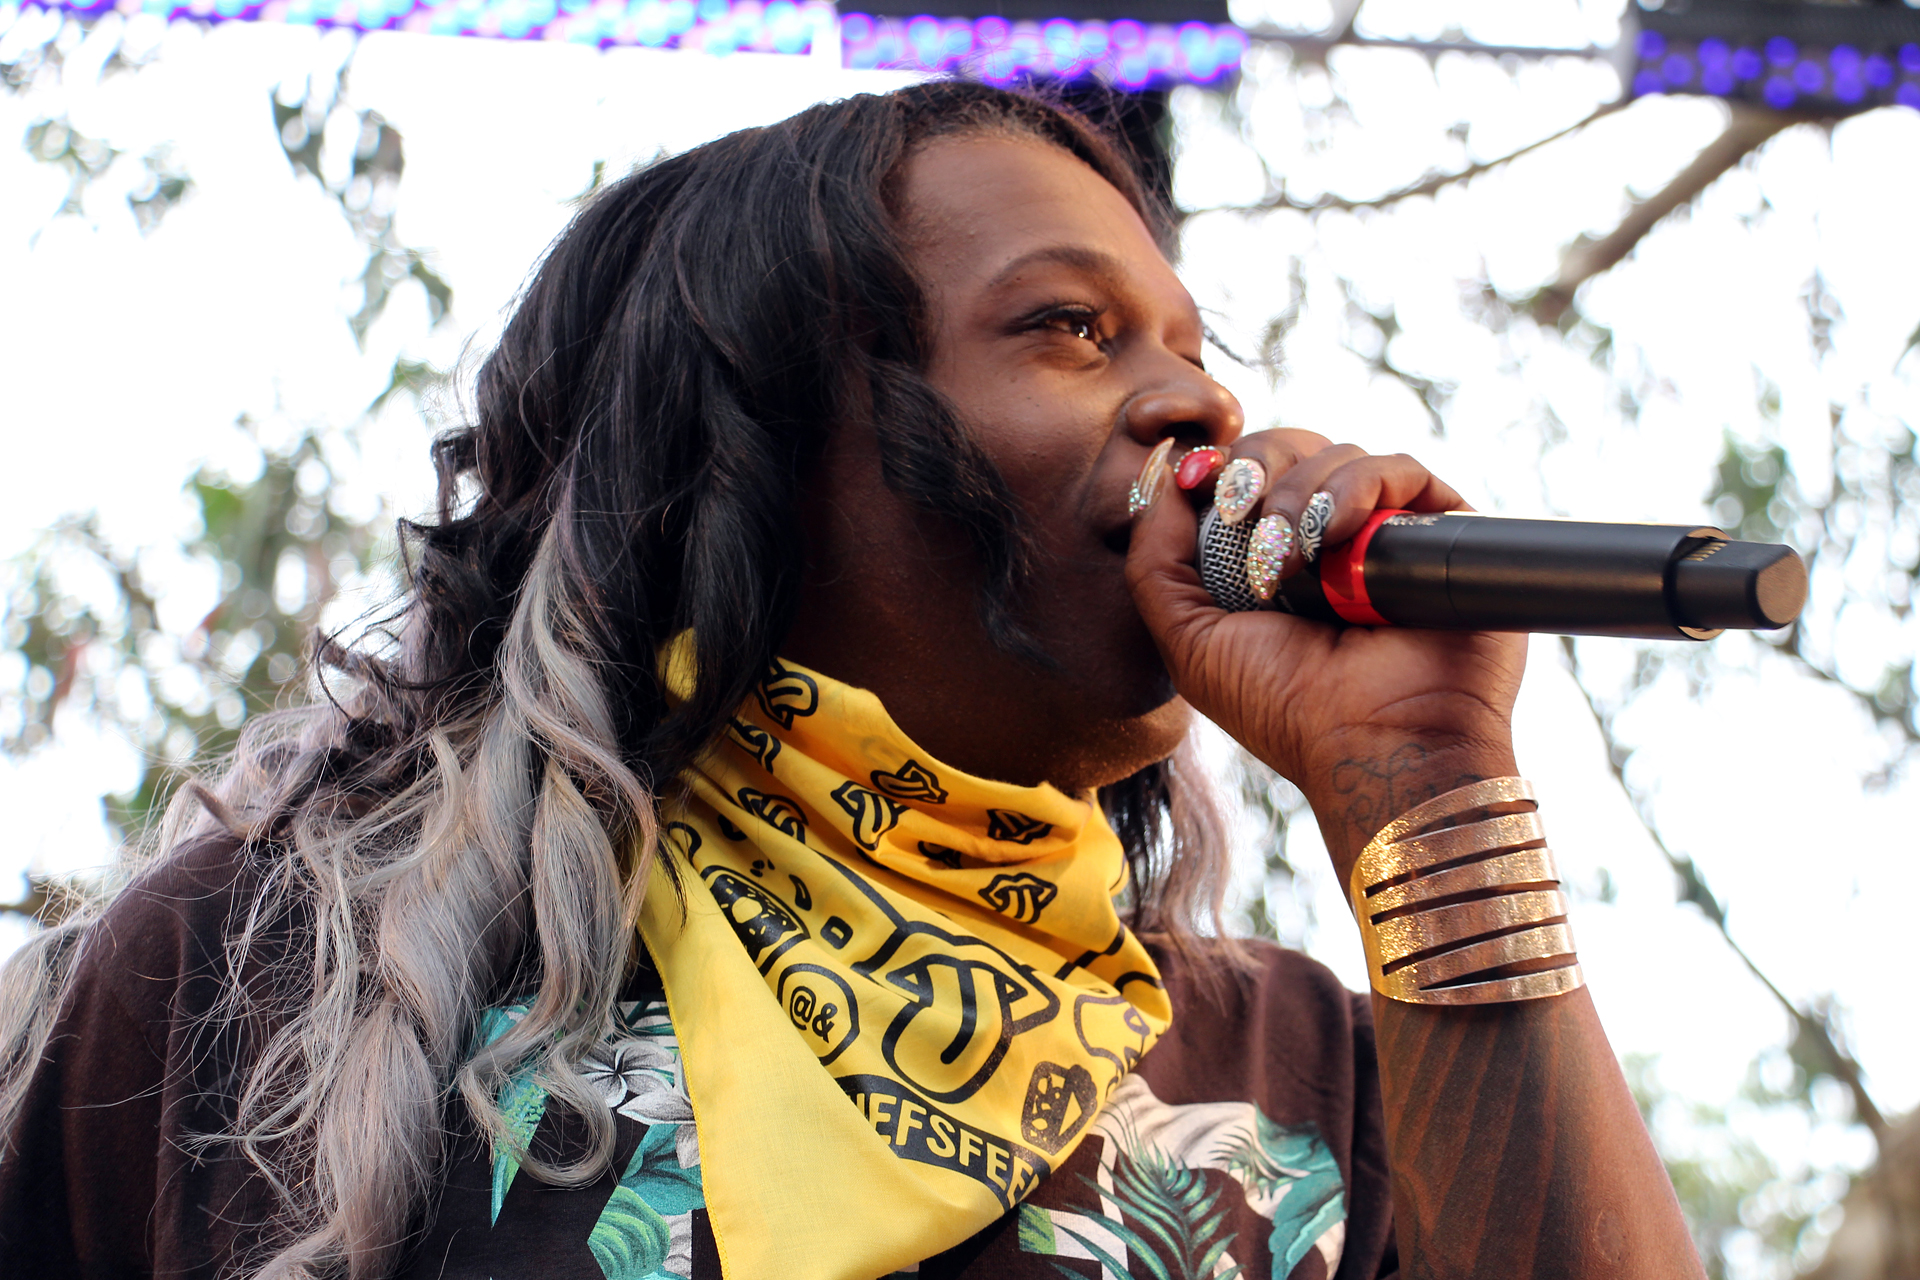 Big Freedia performing at Outside Lands GastroMagic stage.